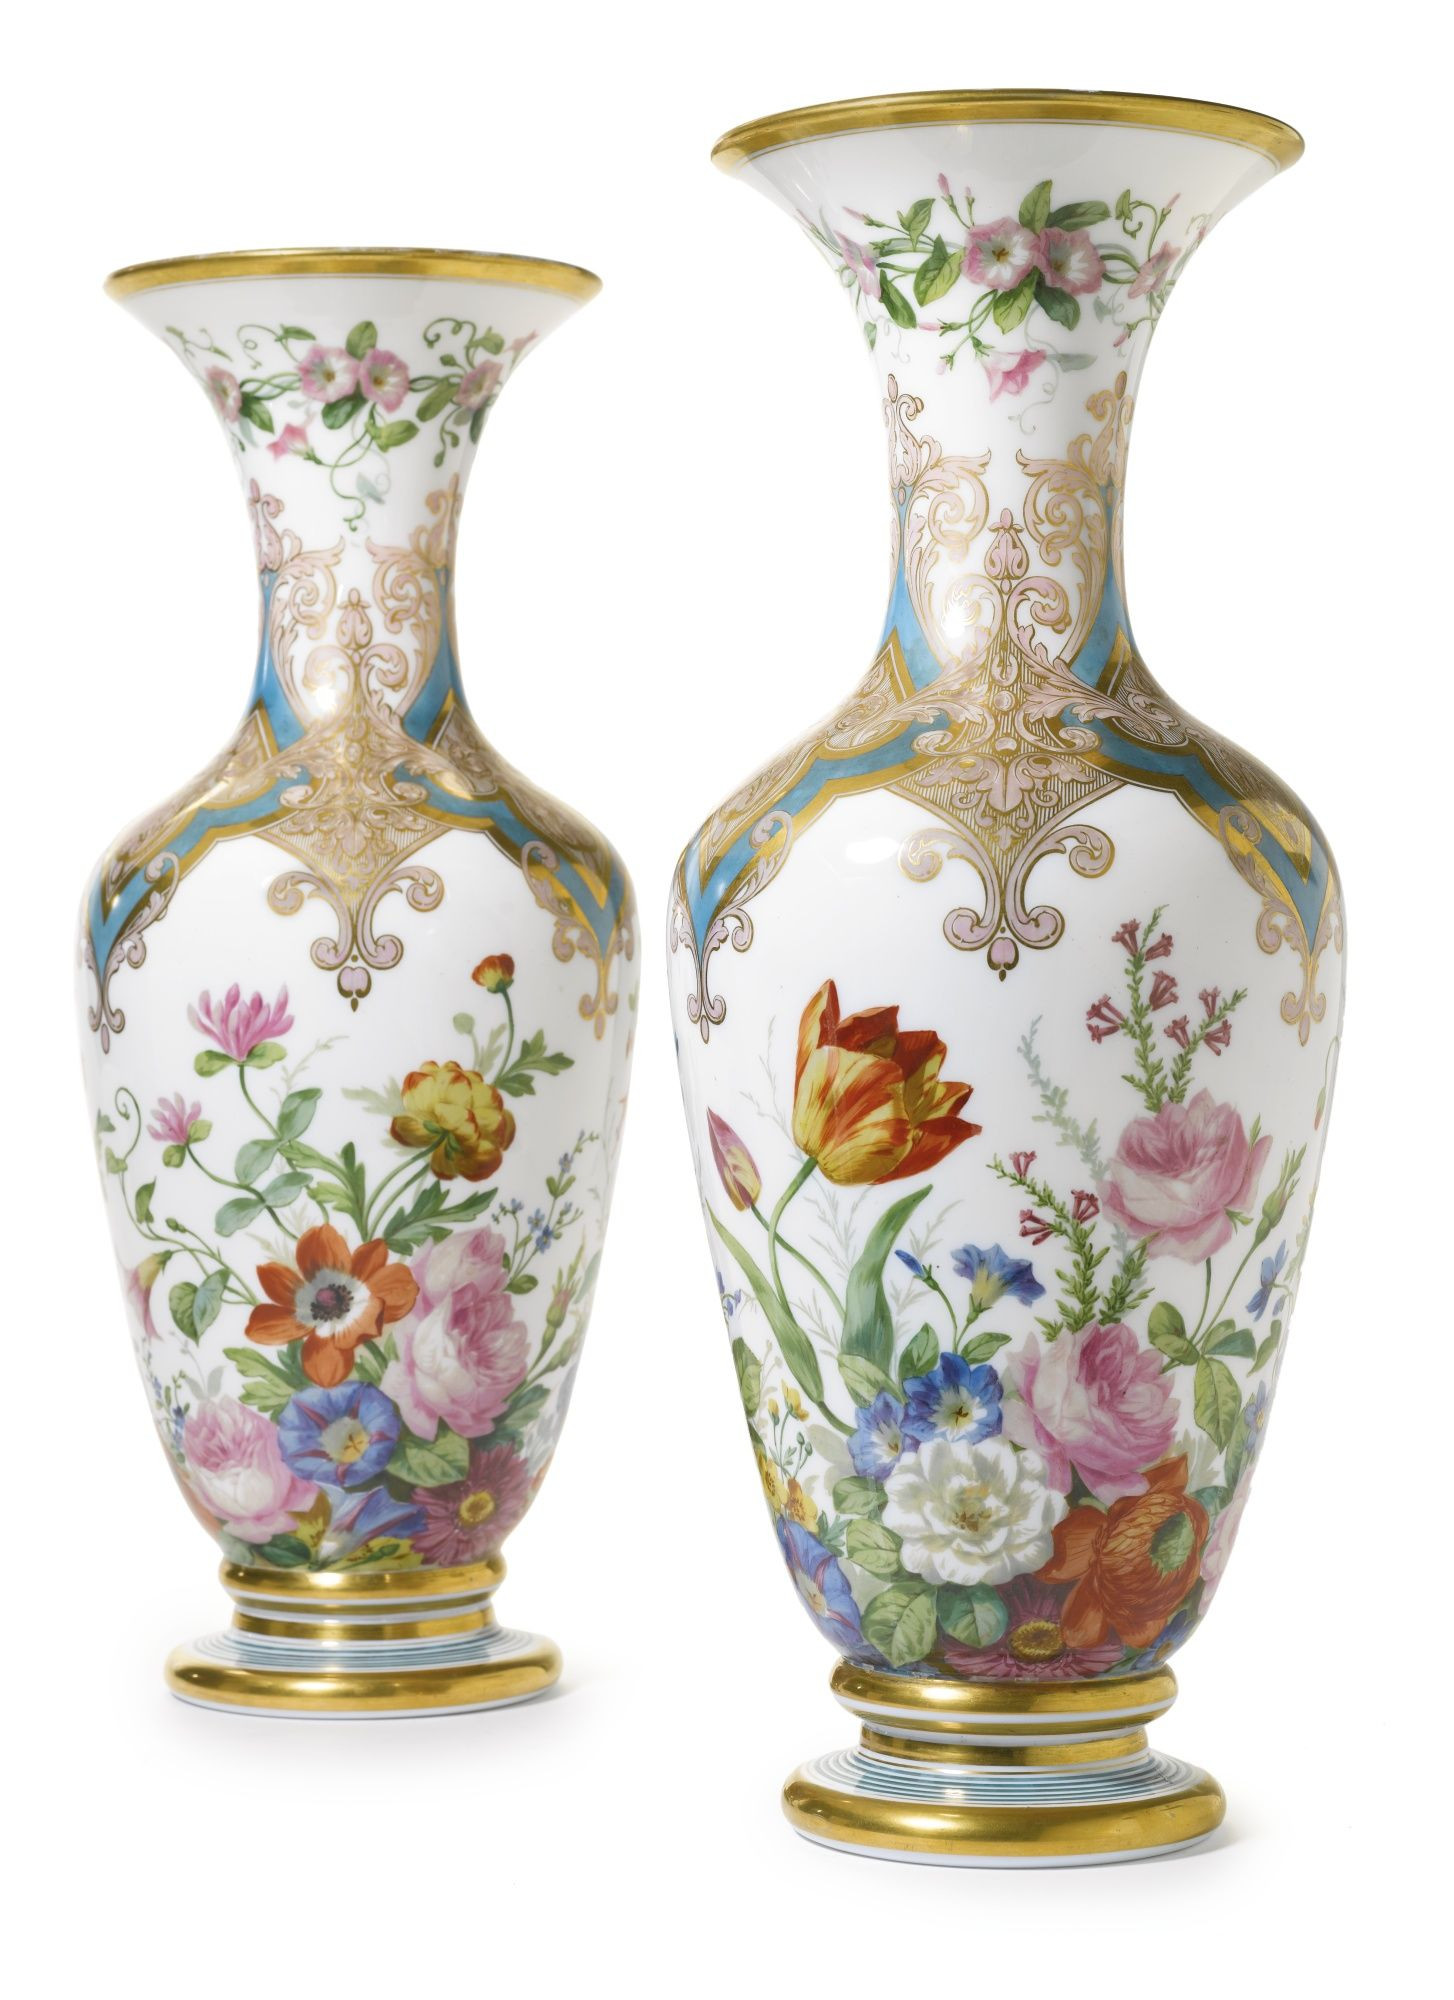 21 attractive Glass Urn Vase 2024 free download glass urn vase of a pair of french white opaline glass vasescirca 1860 lot in a pair of french white opaline glass vasescirca 1860 lot sothebys